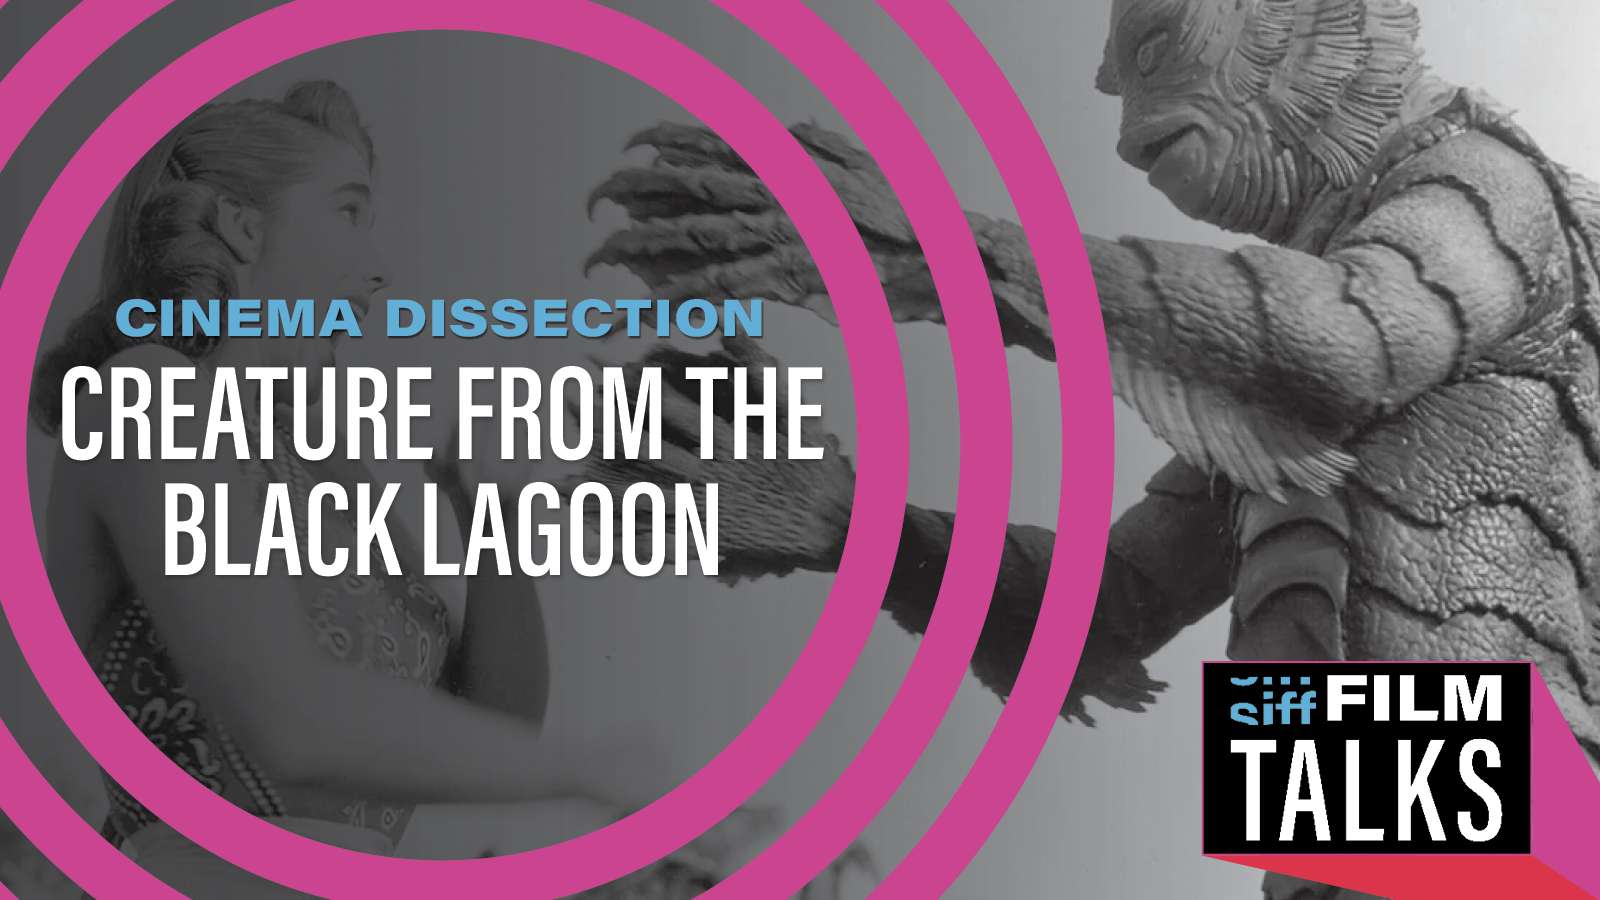 Cinema Dissection: Creature from the Black Lagoon